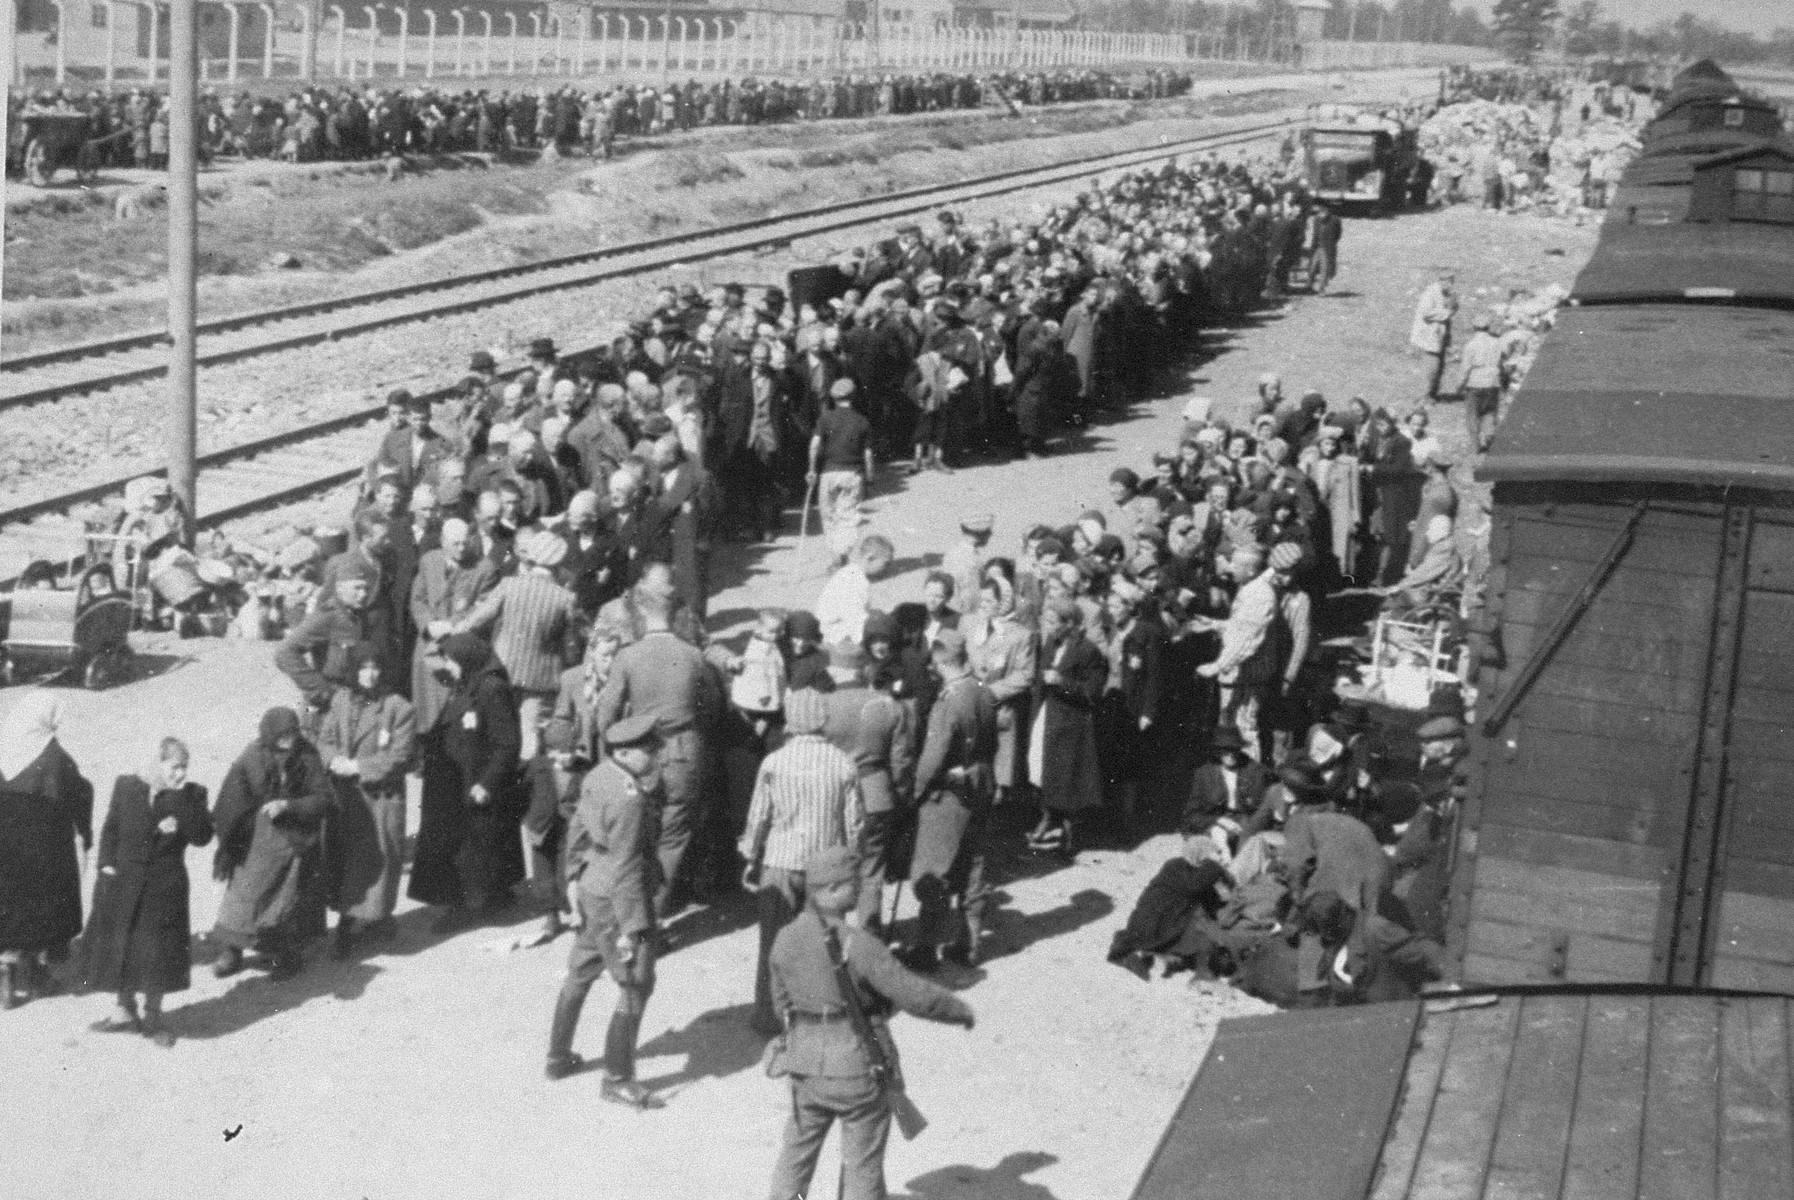 Jews from Subcarpathian Rus undergo a selection on the ramp at Auschwitz-Birkenau.

Pictured in front holding a riding crop may be either SS Unterscharfuehrer Wilhelm Emmerich or SS Haupsturmfuehrer Georg Hoecker assisted by the Jewish prisoner Hans Schorr.  Also pictured are Norbert Lopper and Irena Fogel (later Weiss) is pictured in the front second from left, facing forward. Pictured in the front right is Erszebet Klein Roth, her mother and aunt.

Additional individuals have been identified in the center of the photograph: Hinda Lazarowitz, Pepe Hershkowitz (Apperman), and Gittel (Gail) Hershkowitz (Brandwein).